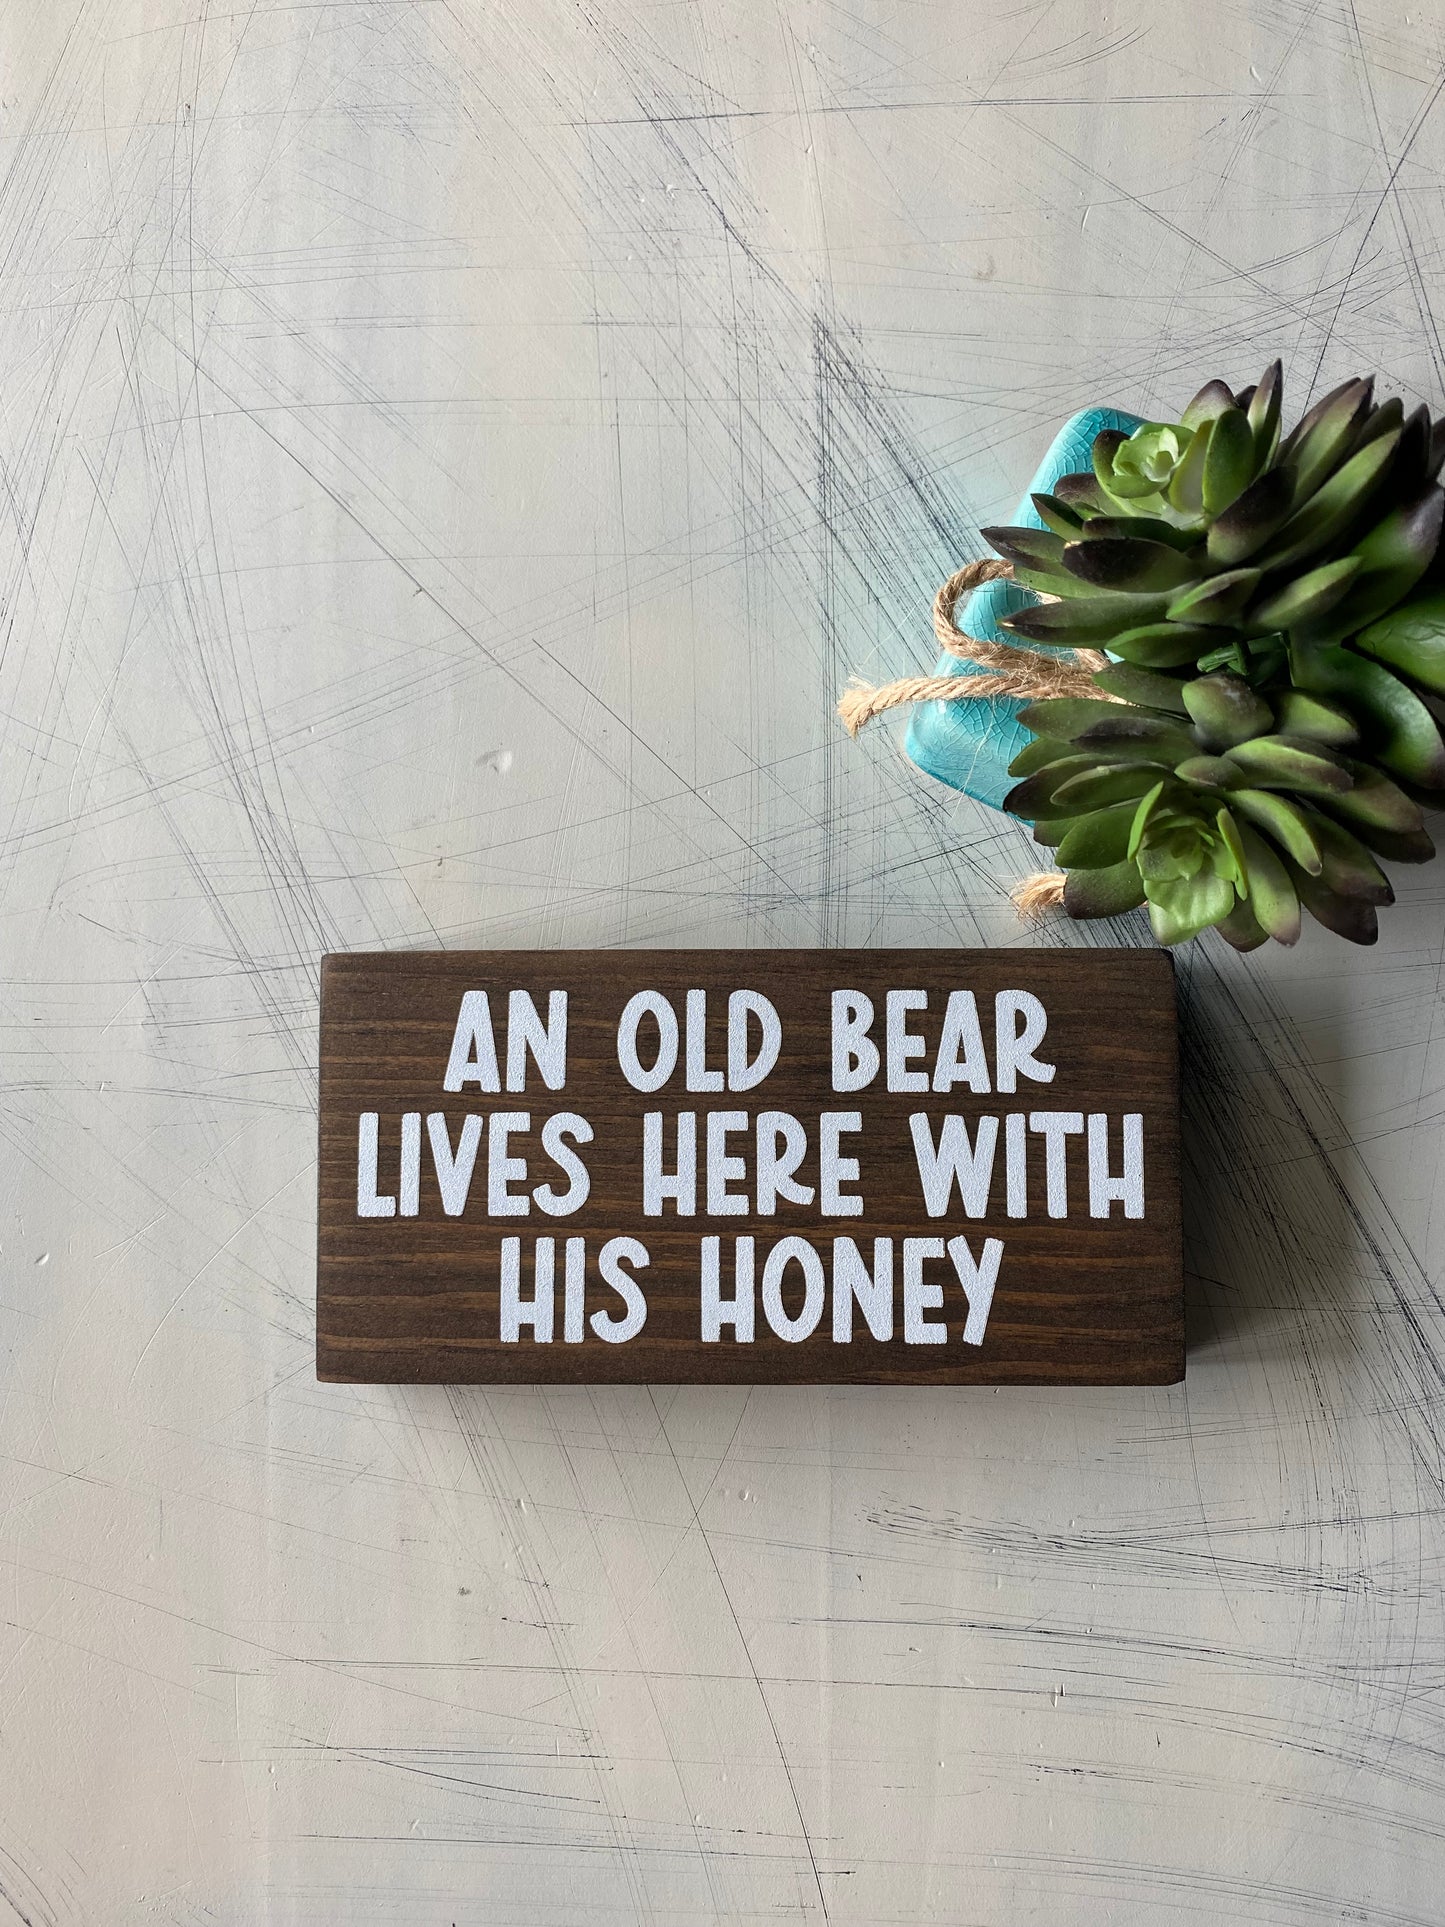 An old bear lives here with his honey. - choose your pronoun - Novotny Designs handmade mini wood sign